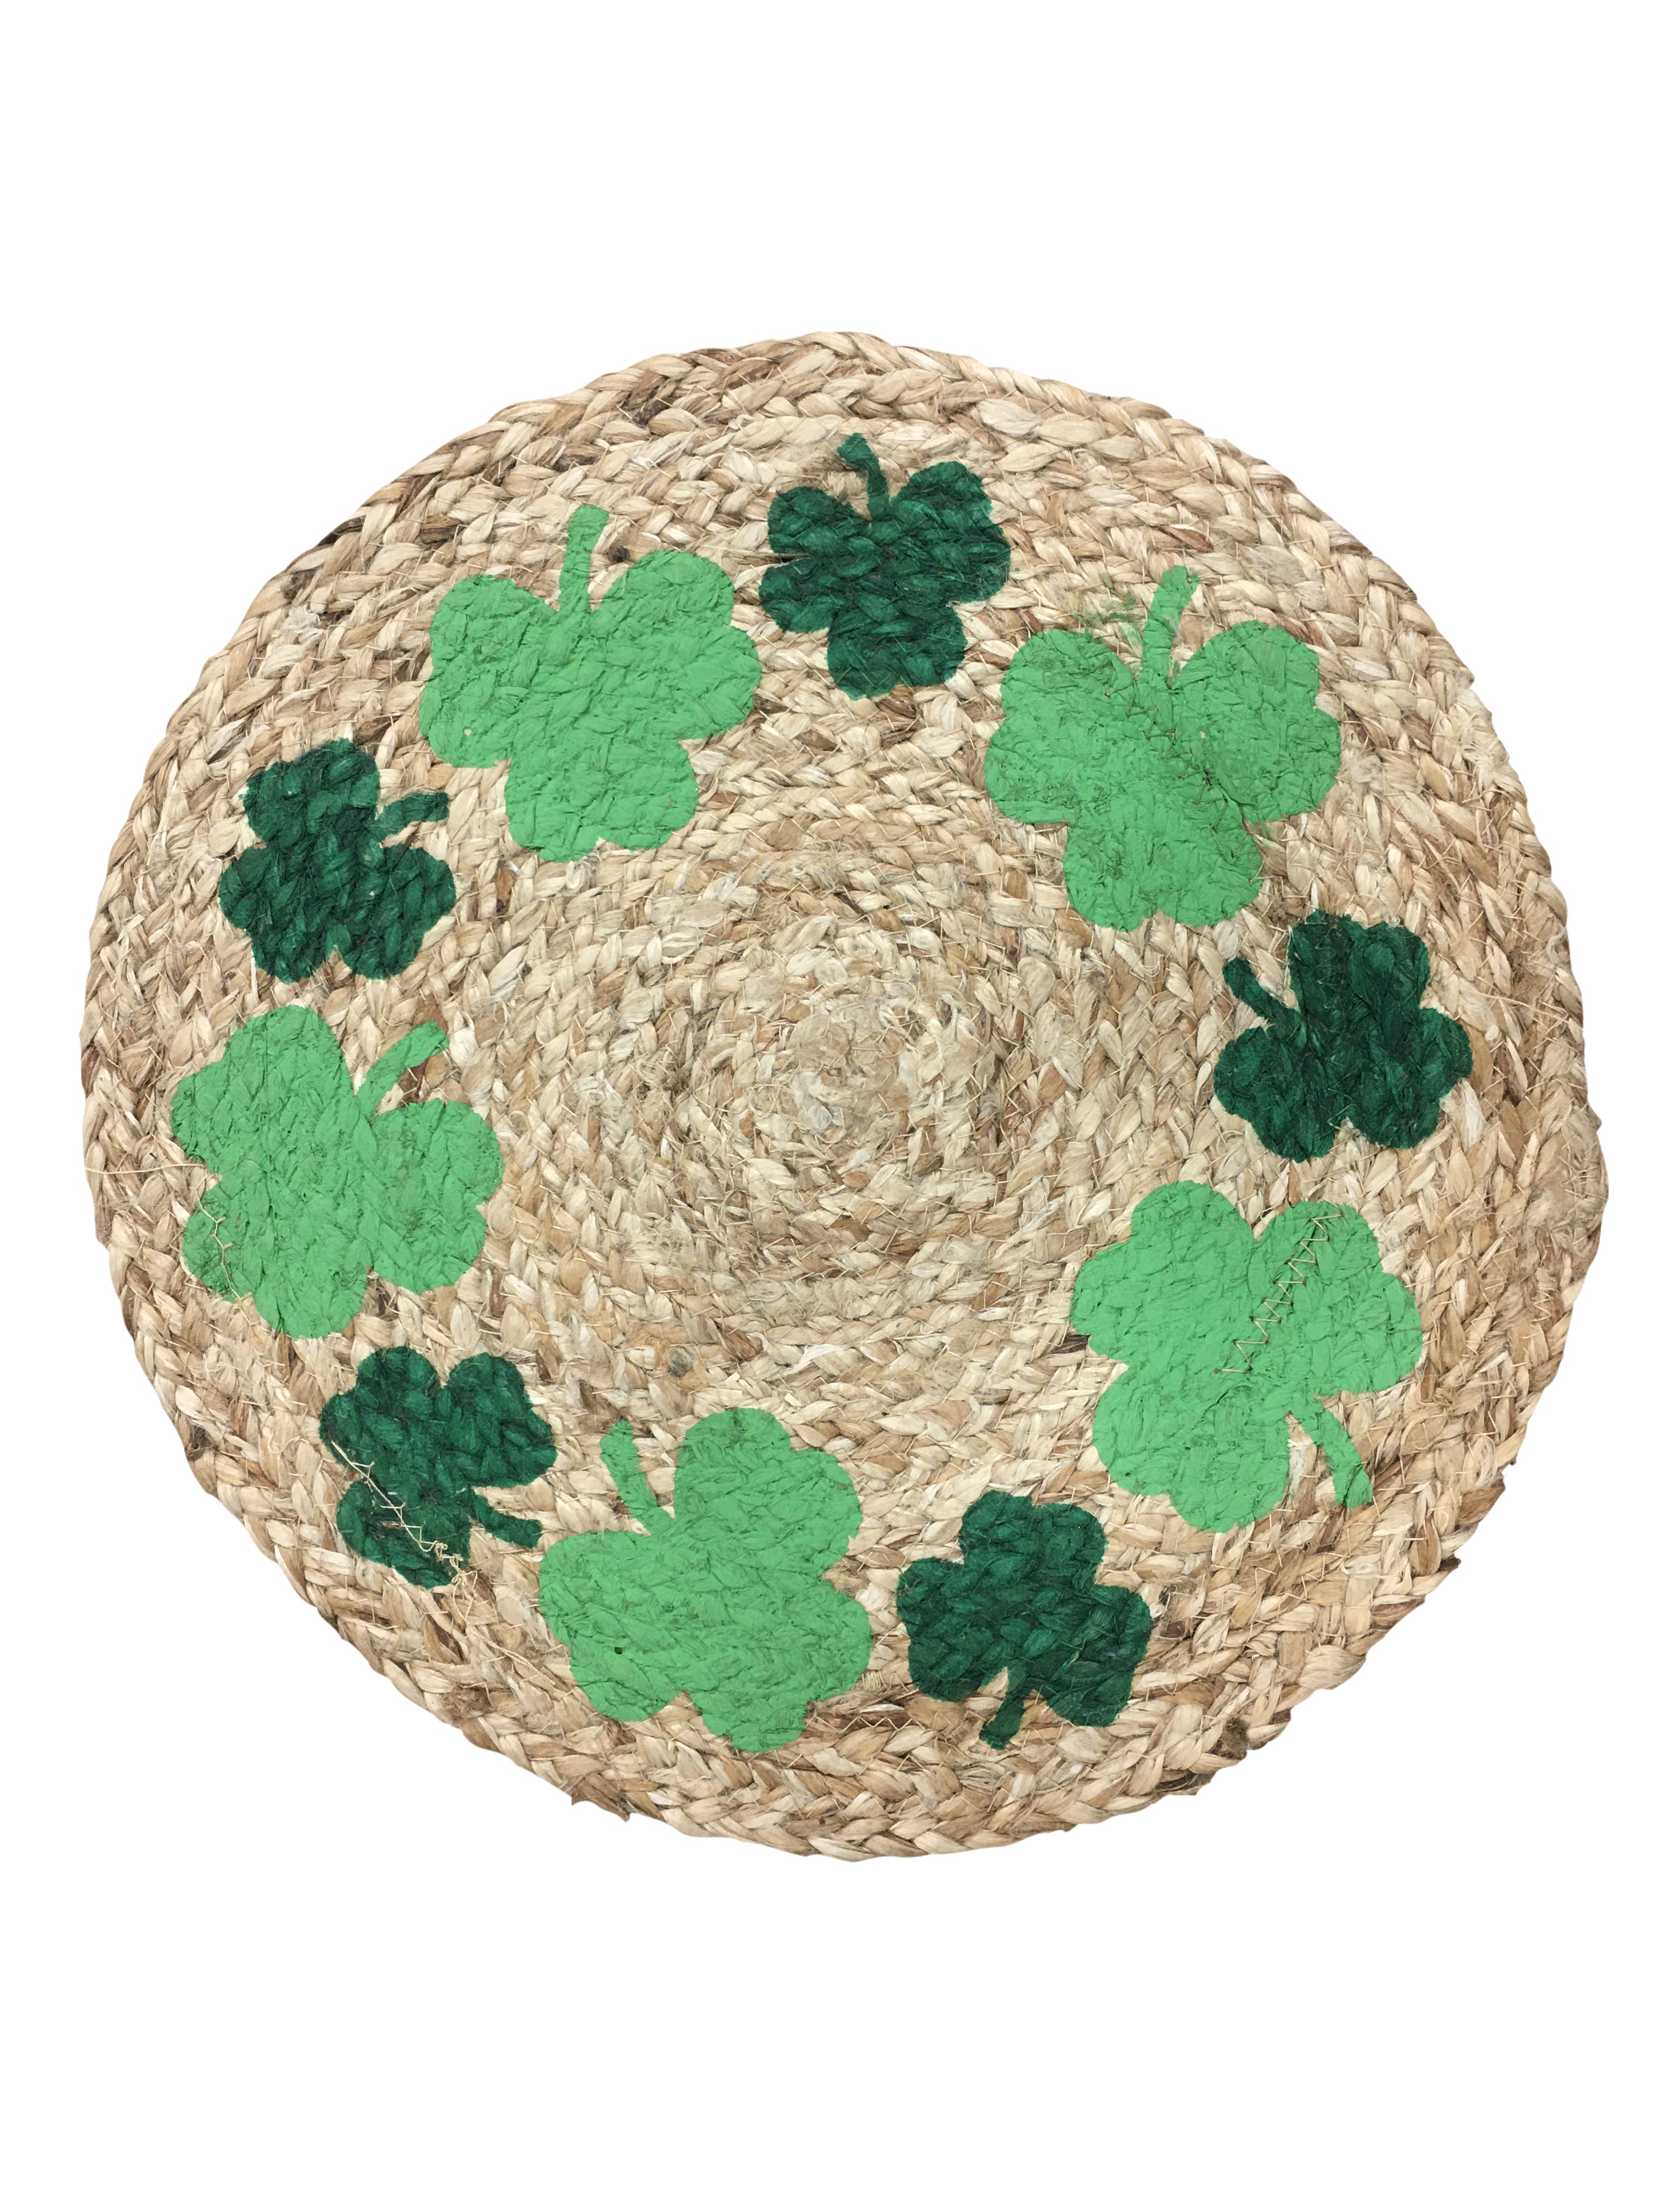 Jute Placemats, Chargers / Set of 2 / 15 in. Round/ Natural with Leaf Design